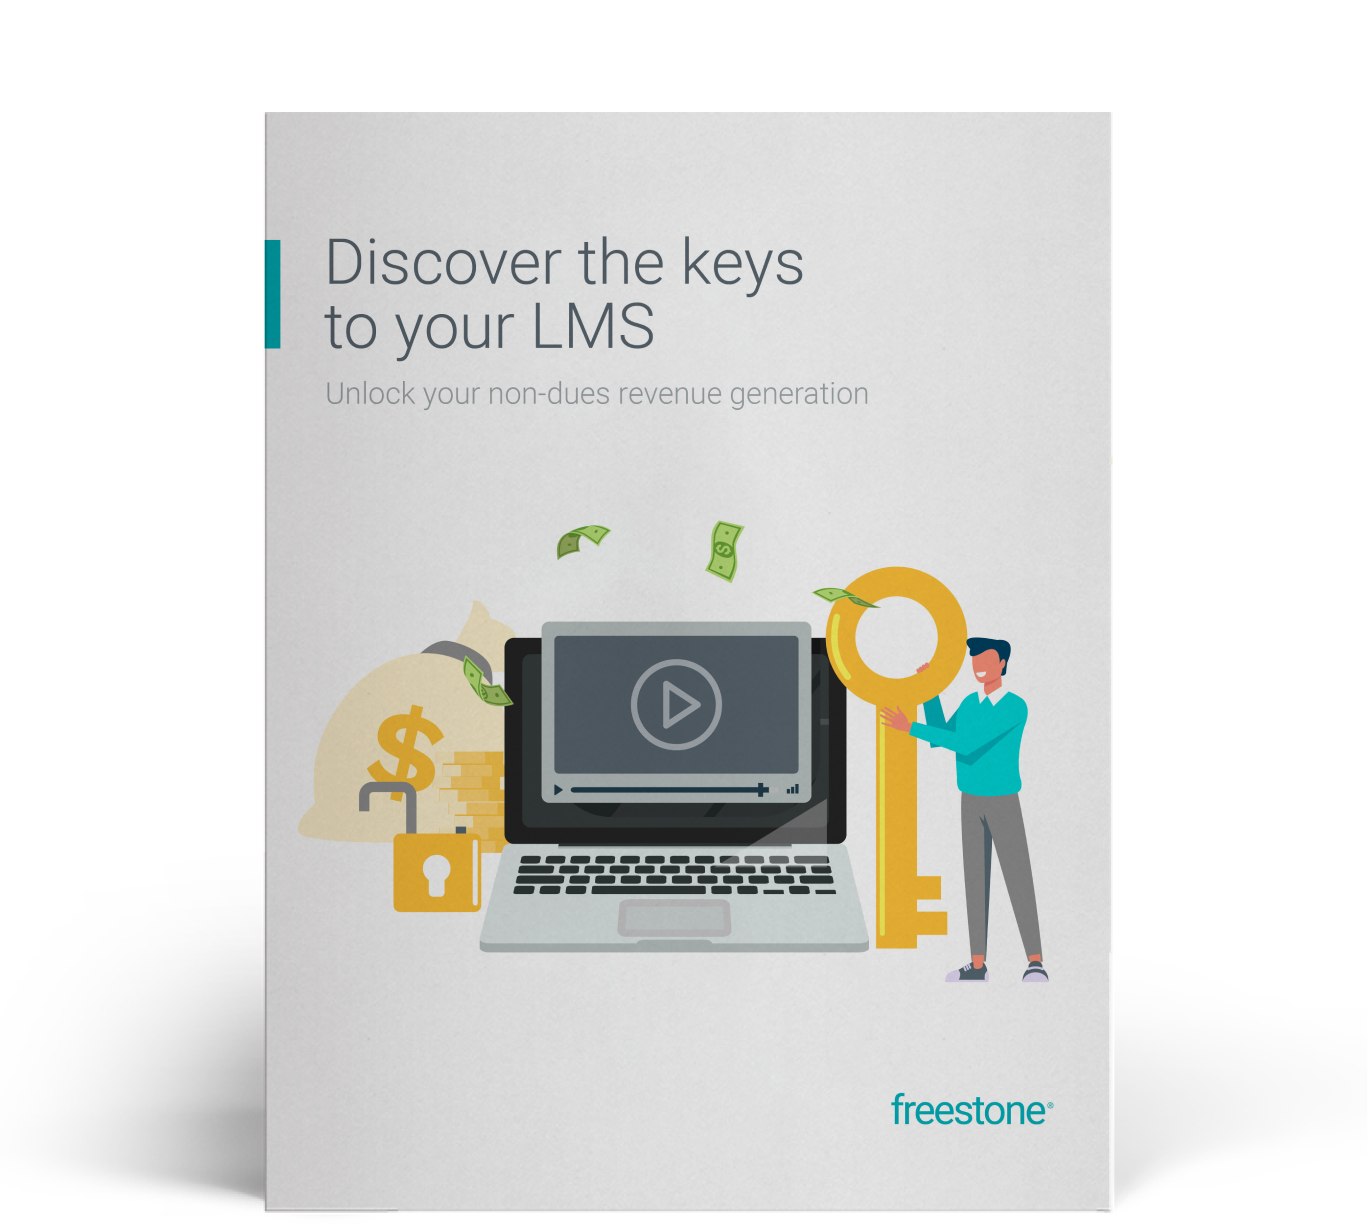 Whitepaper Thumbnail: Discover the Keys to your LMS